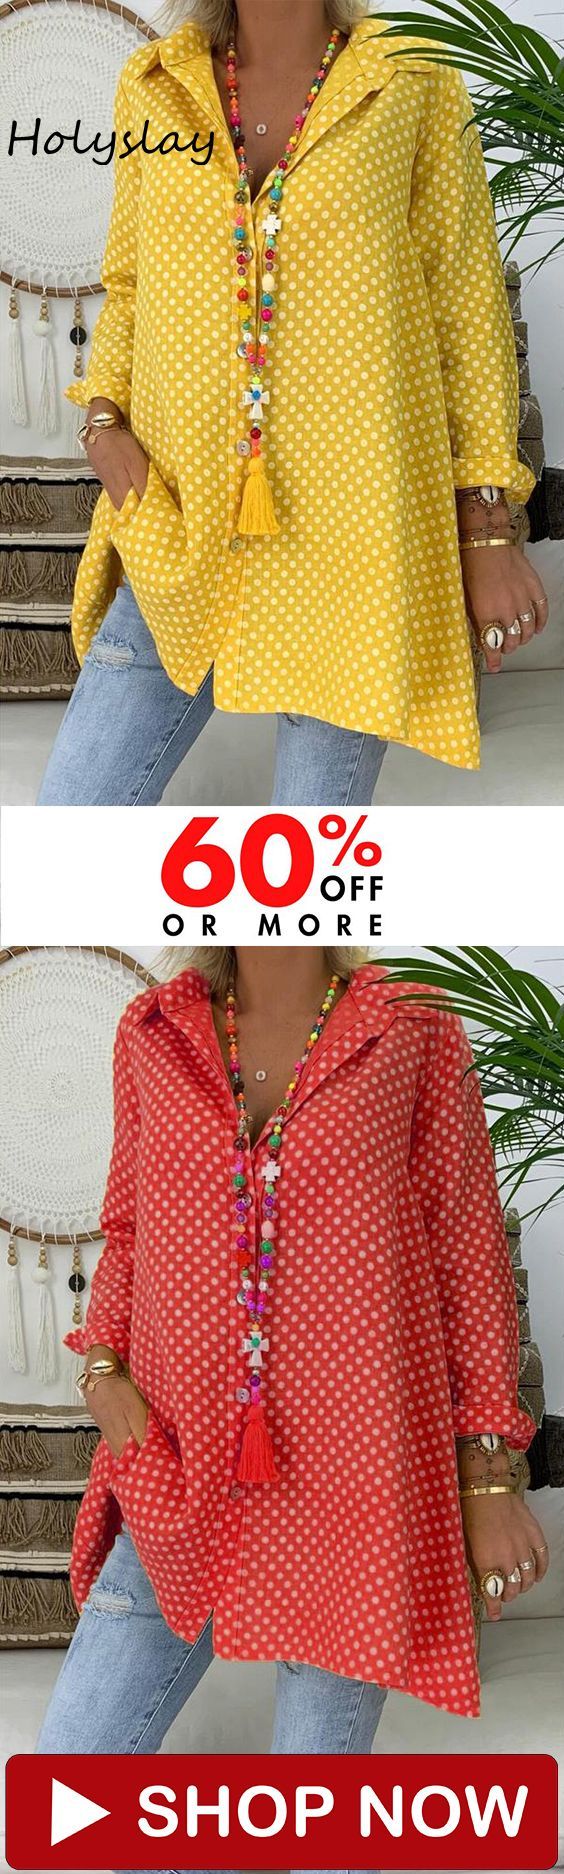 $28.05 only, Spring/Summer Polka Dot Cotton Printed Plus Size Shirt -   23 diy jewelry crafts
 ideas